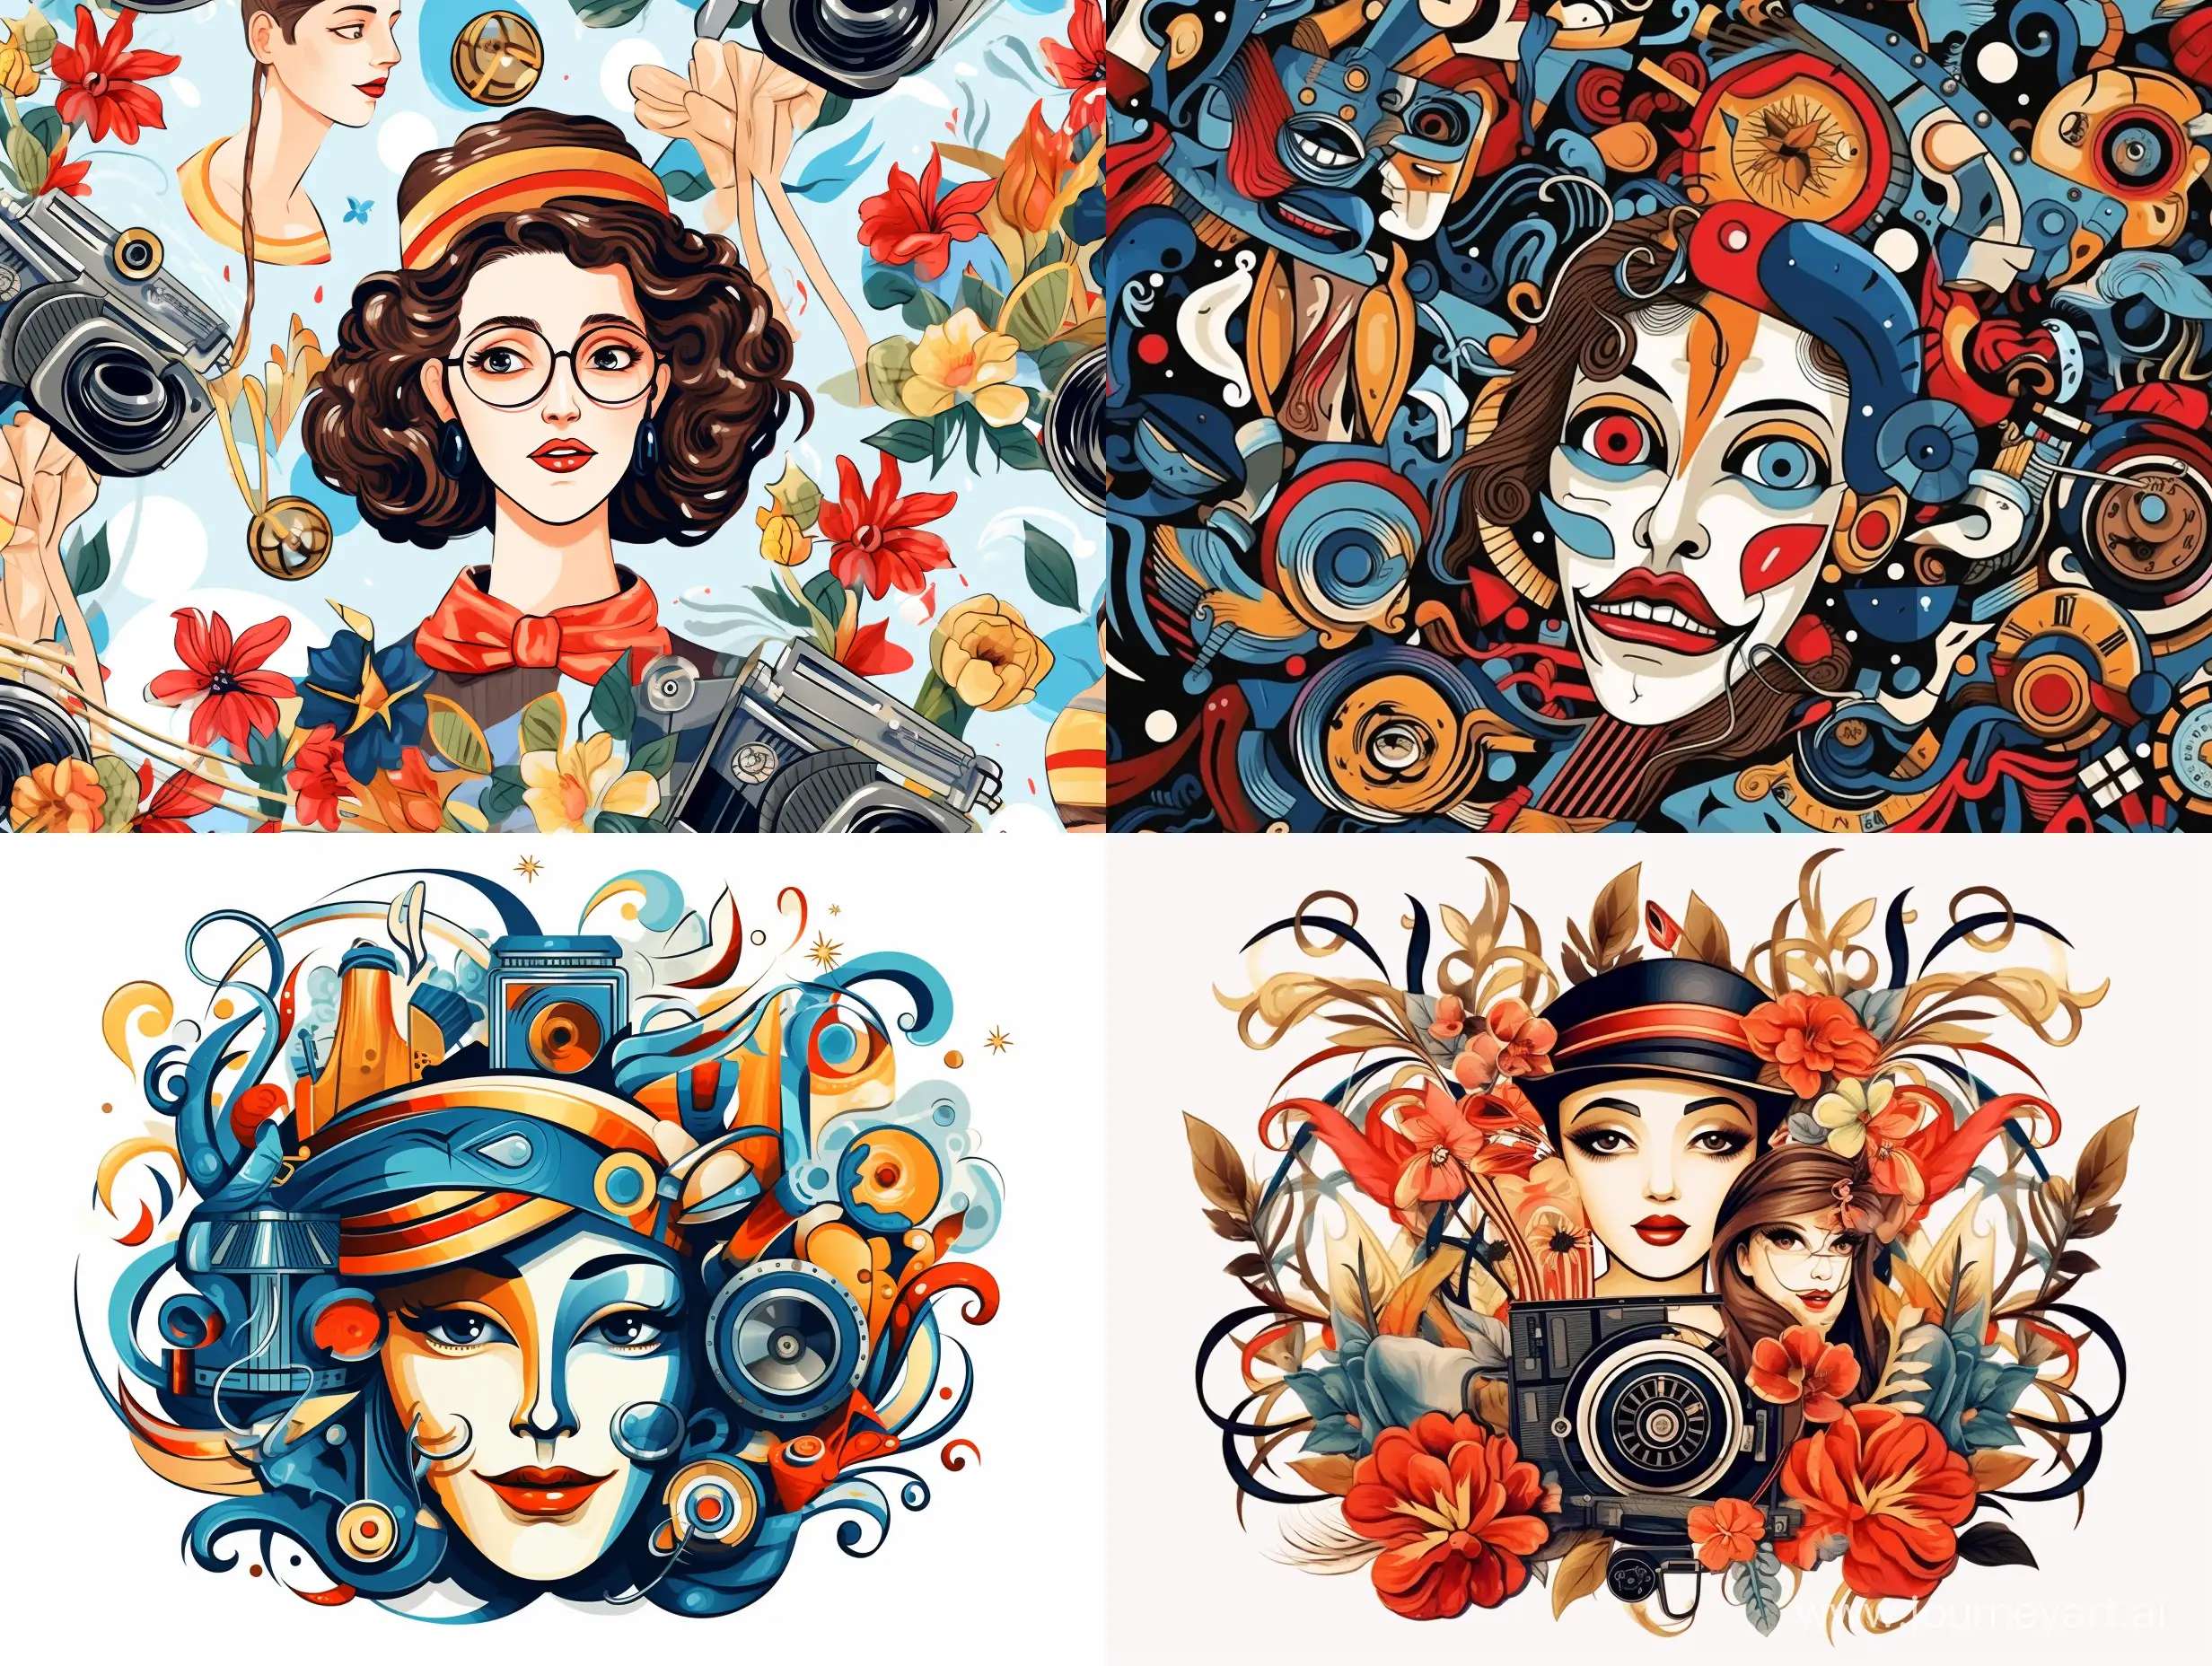 patterned ornament from the attributes of the film industry, stylized caricature, cartoon style,flat illustration, watercolor, ink, Victor Ngai style